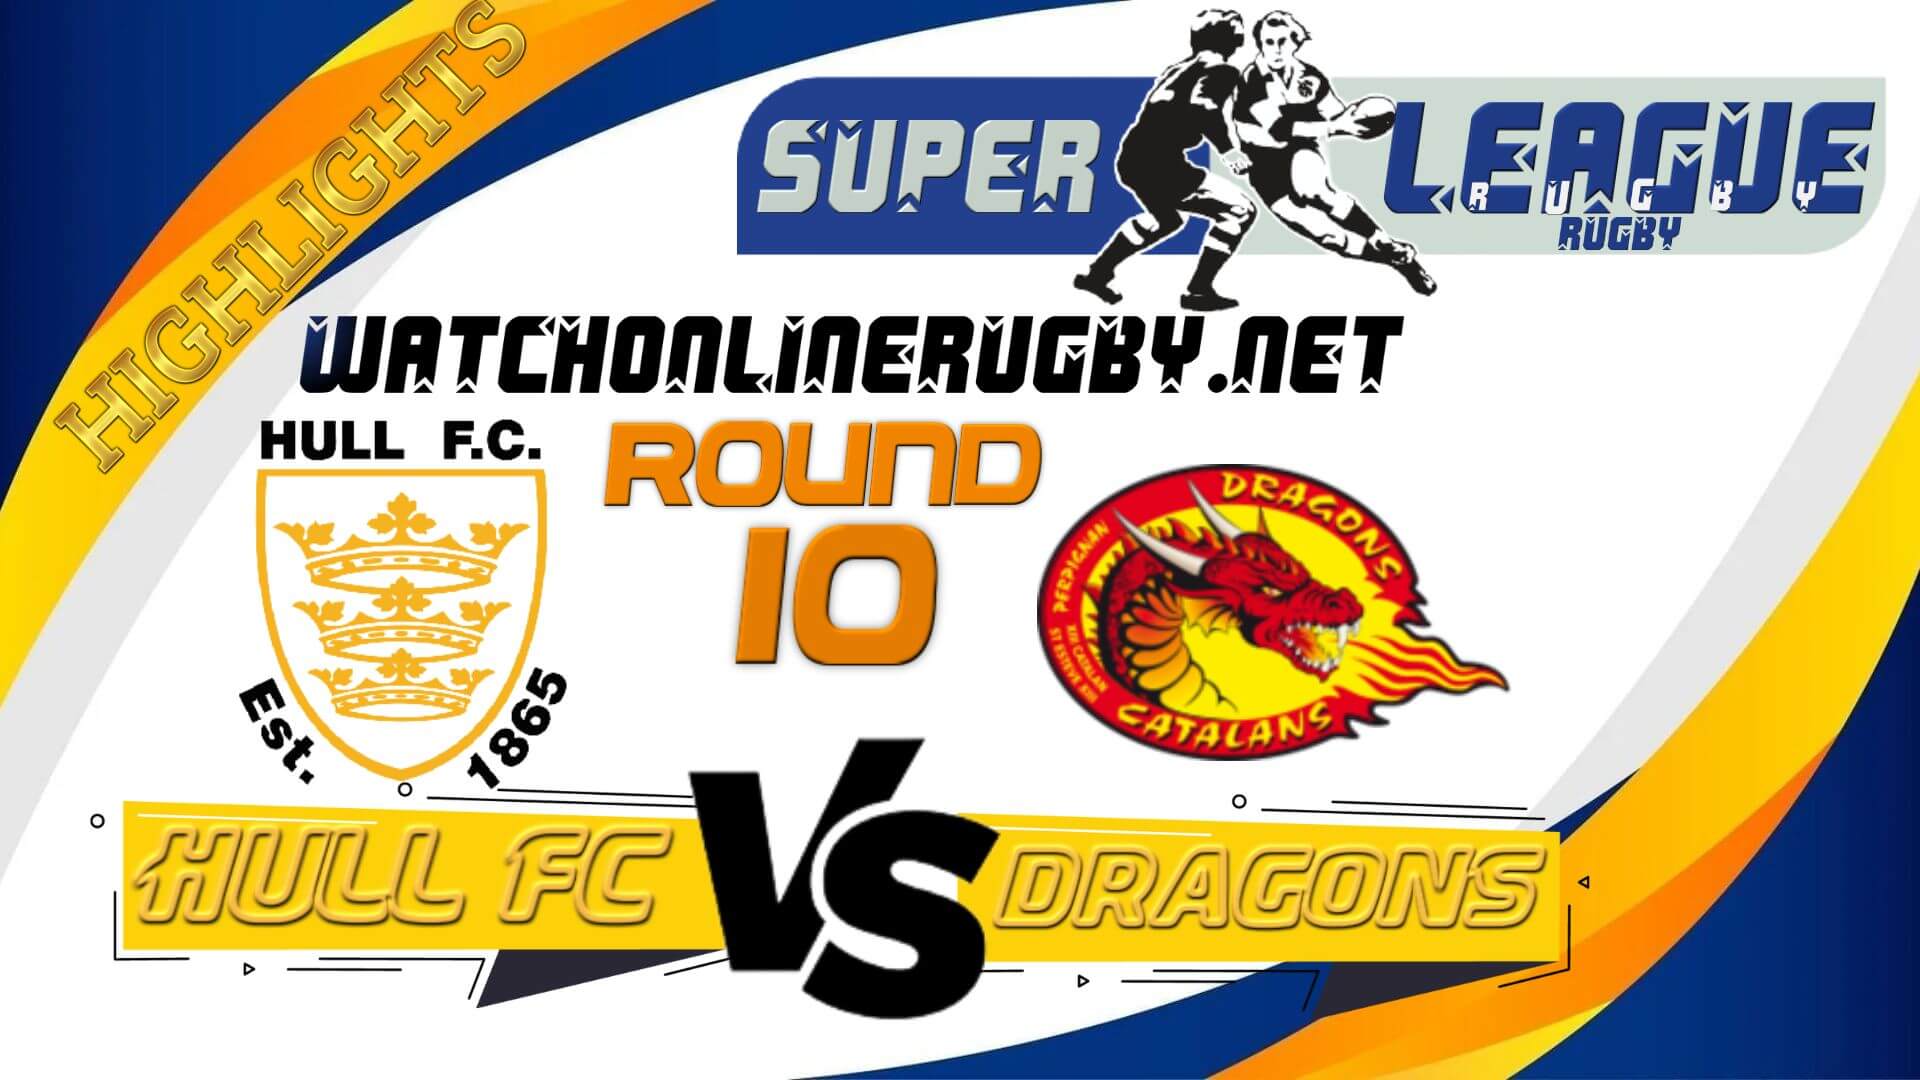 Hull FC Vs Catalans Dragons Super League Rugby 2022 RD 10